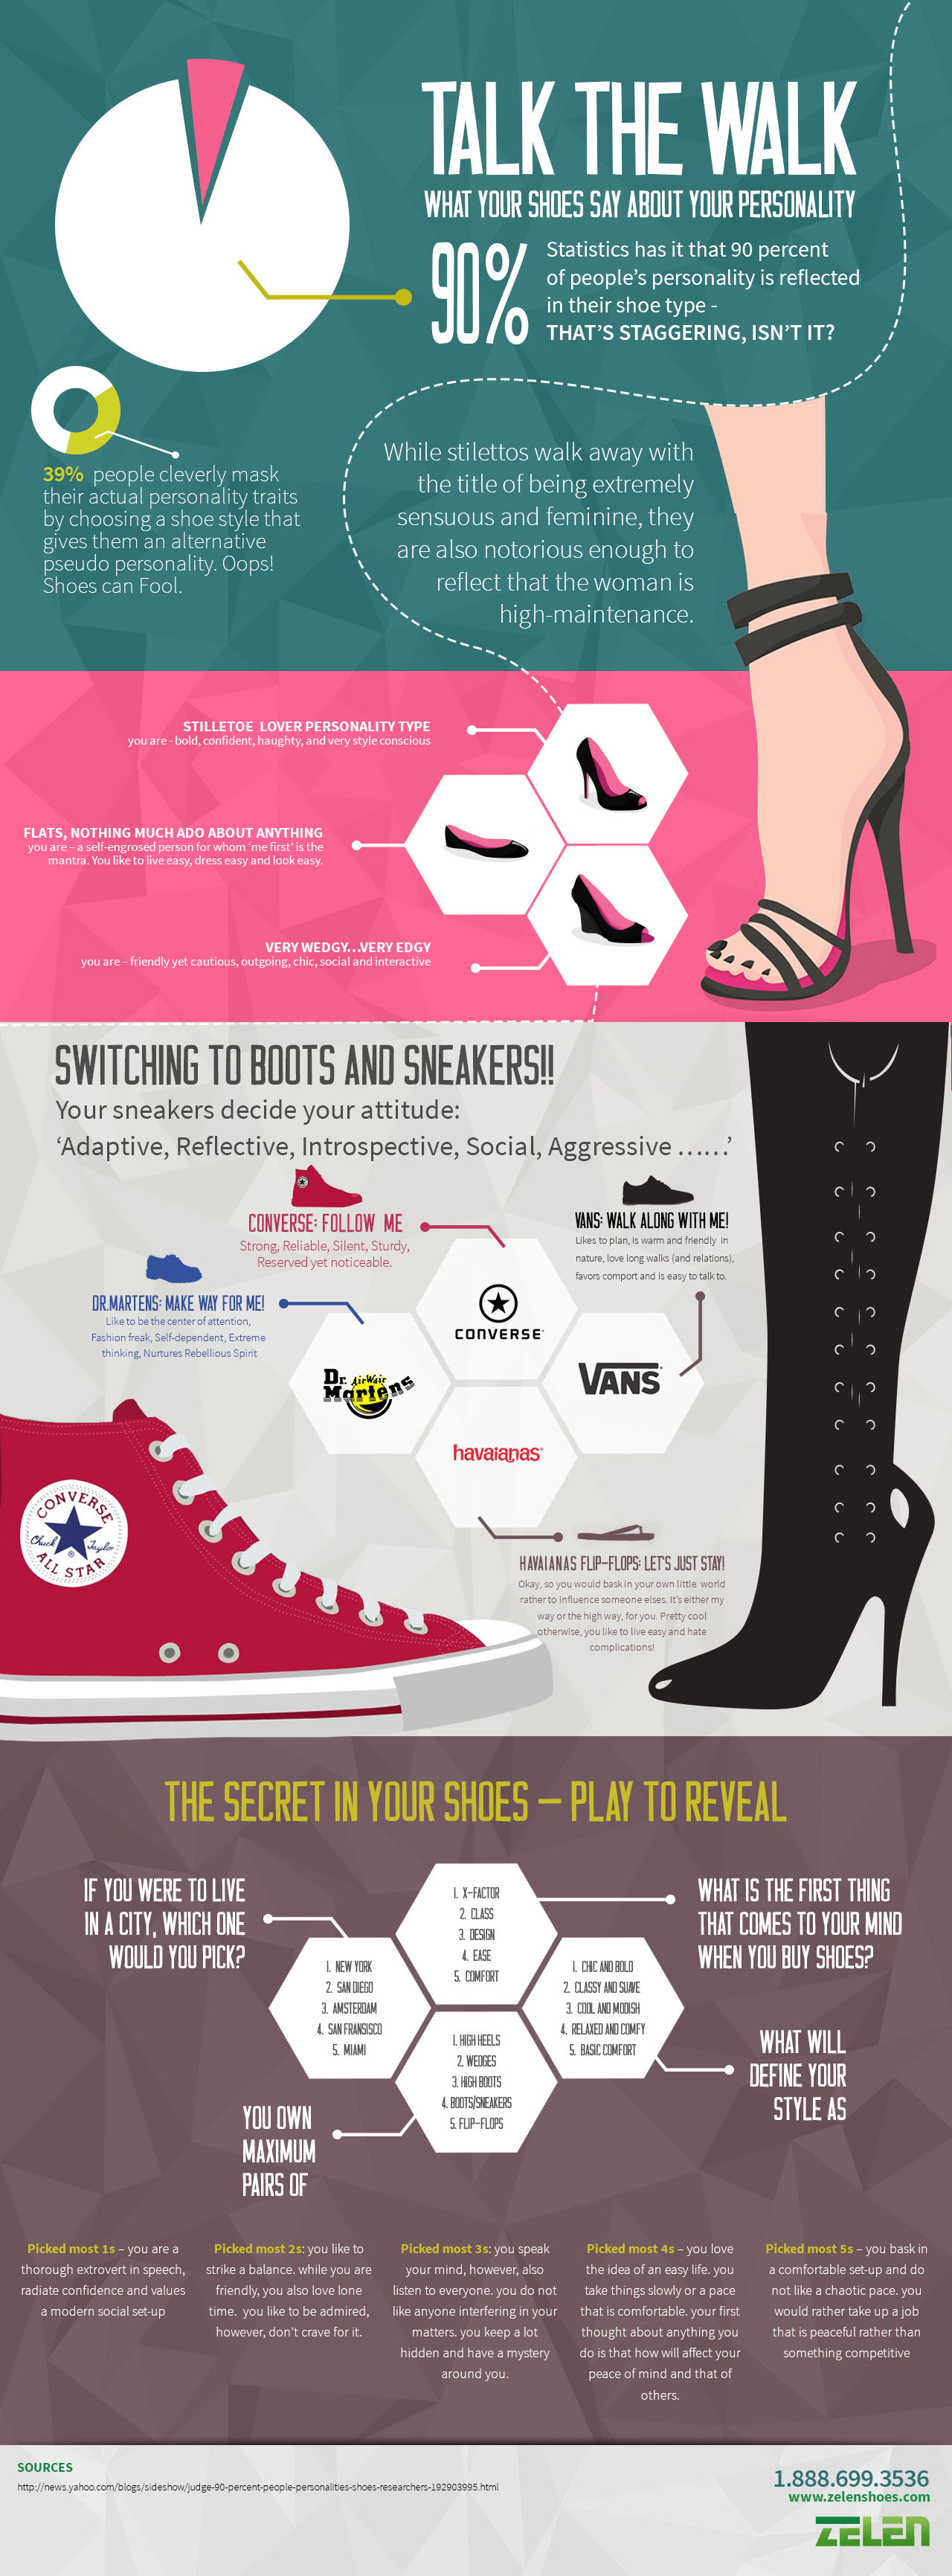 Talk the Walk: What Your Shoes Say about Your Personality #infographic ...